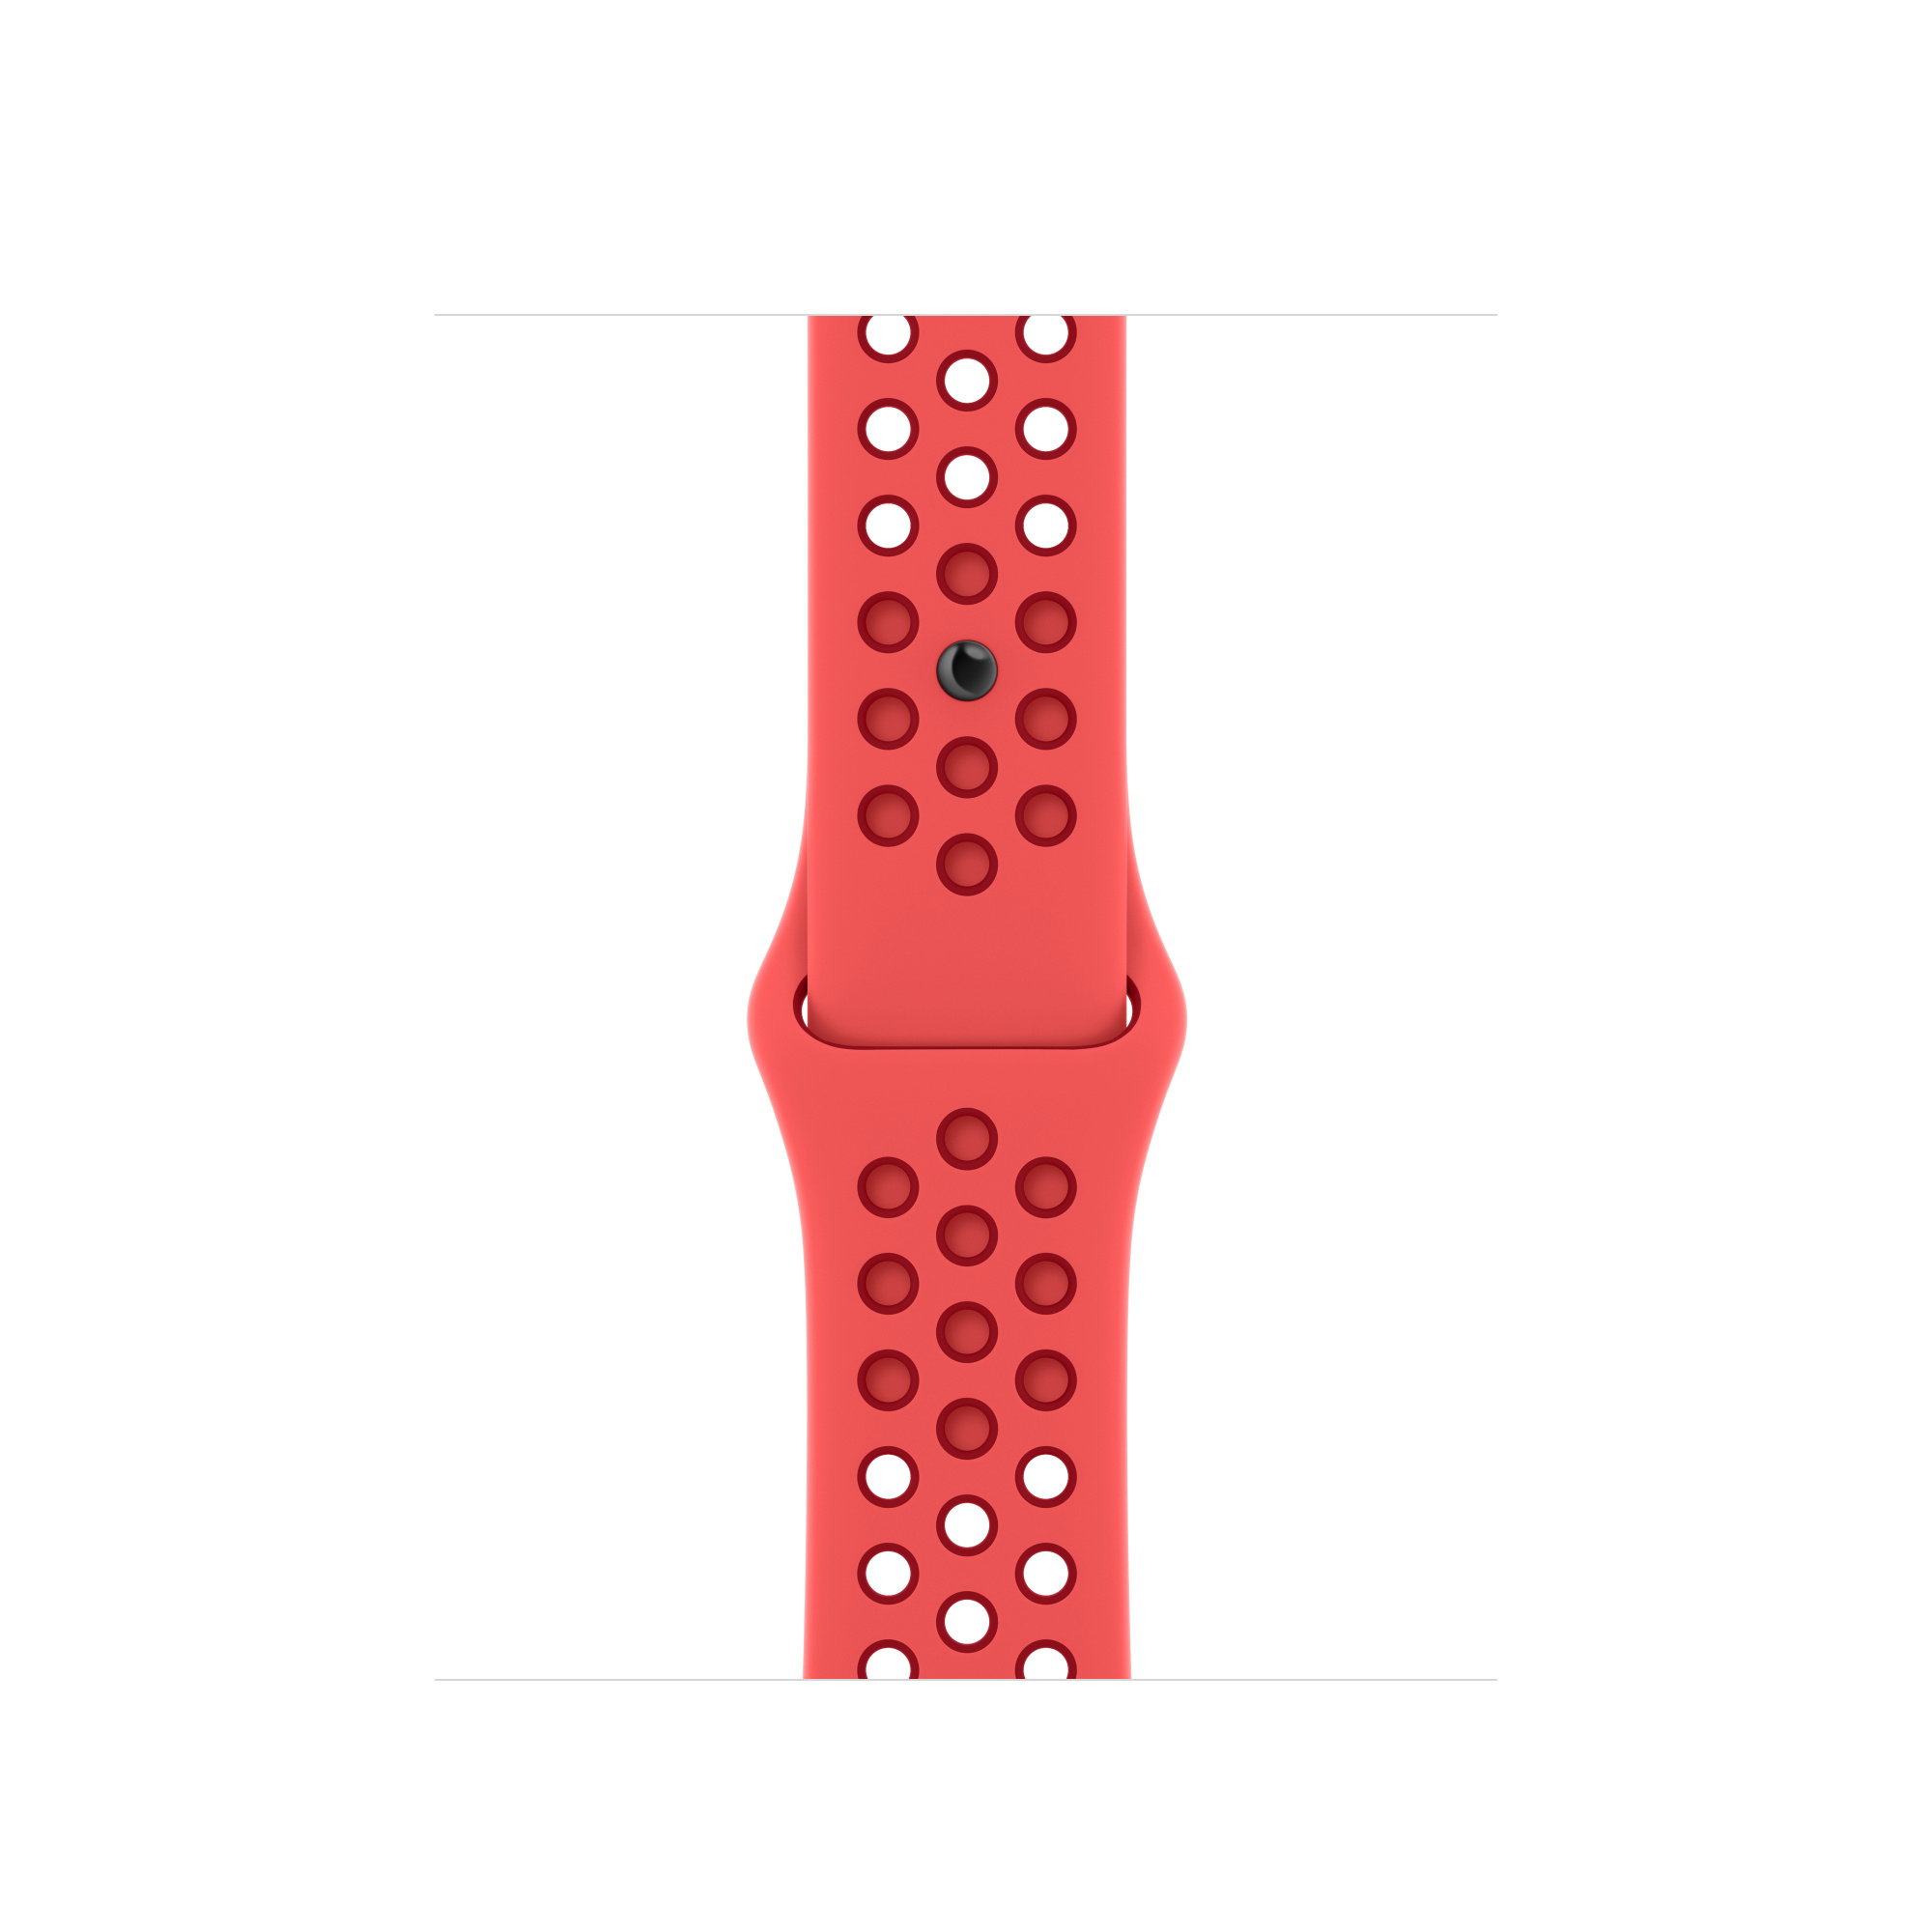 Apple 41mm Nike Sport Band for Apple Watch - Bright Crimson/Gym Red